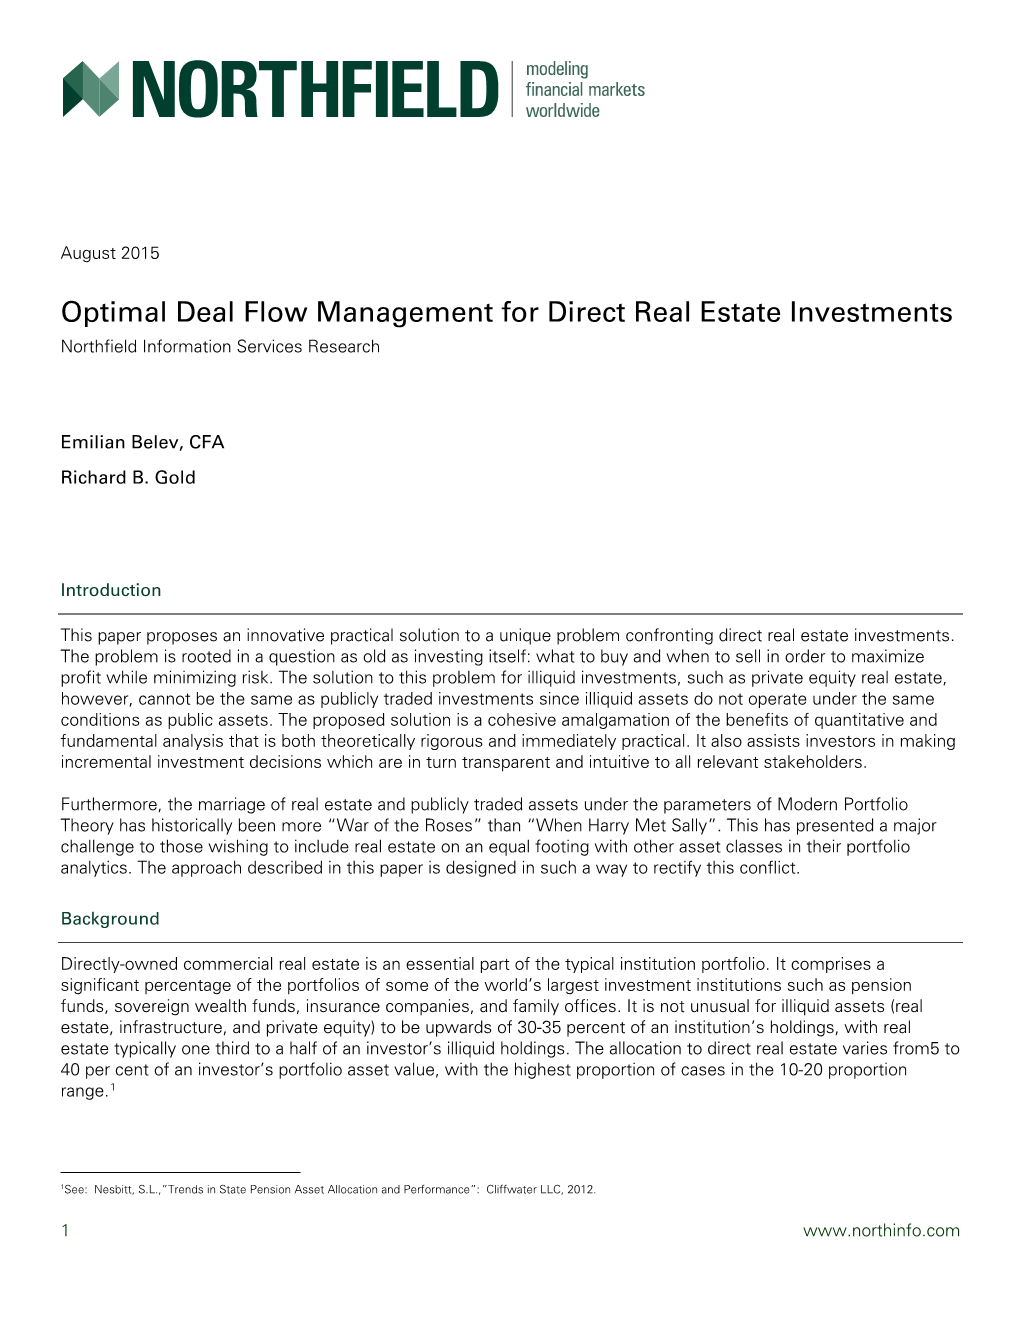 Optimal Deal Flow Management for Direct Real Estate Investments Northfield Information Services Research